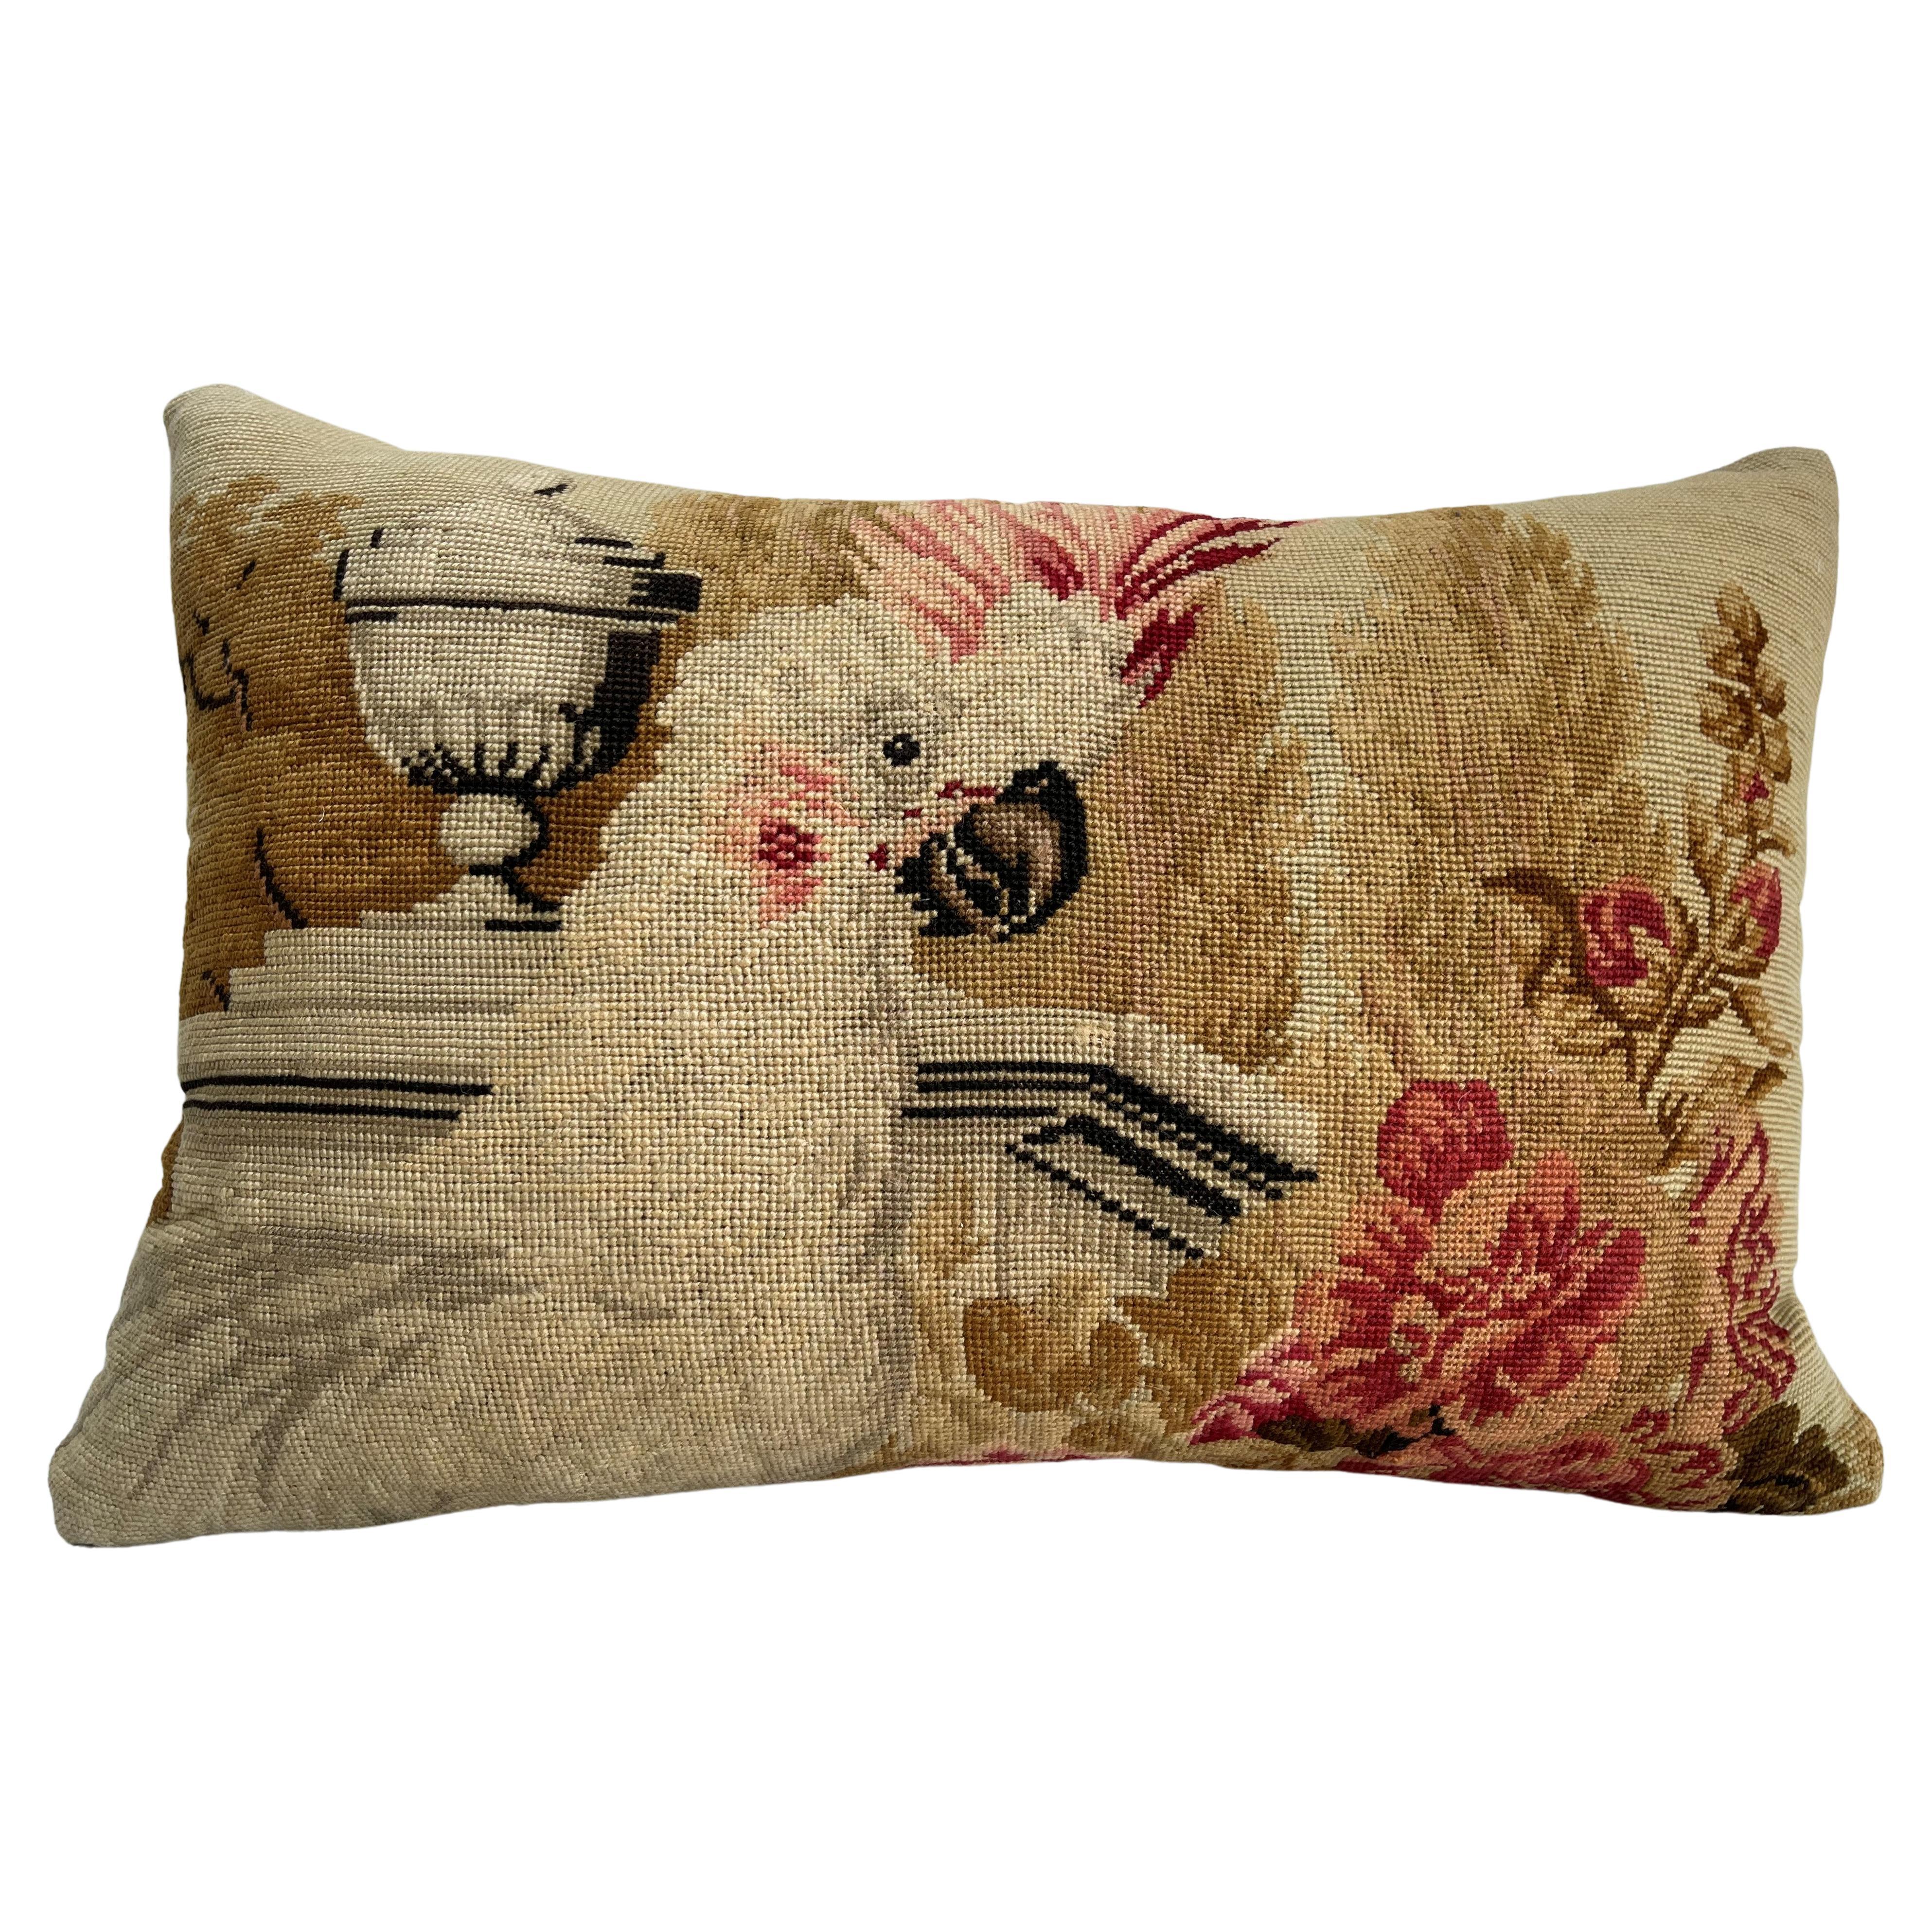 Early-19th Century English Tapestry Pillow 14" X 8" For Sale